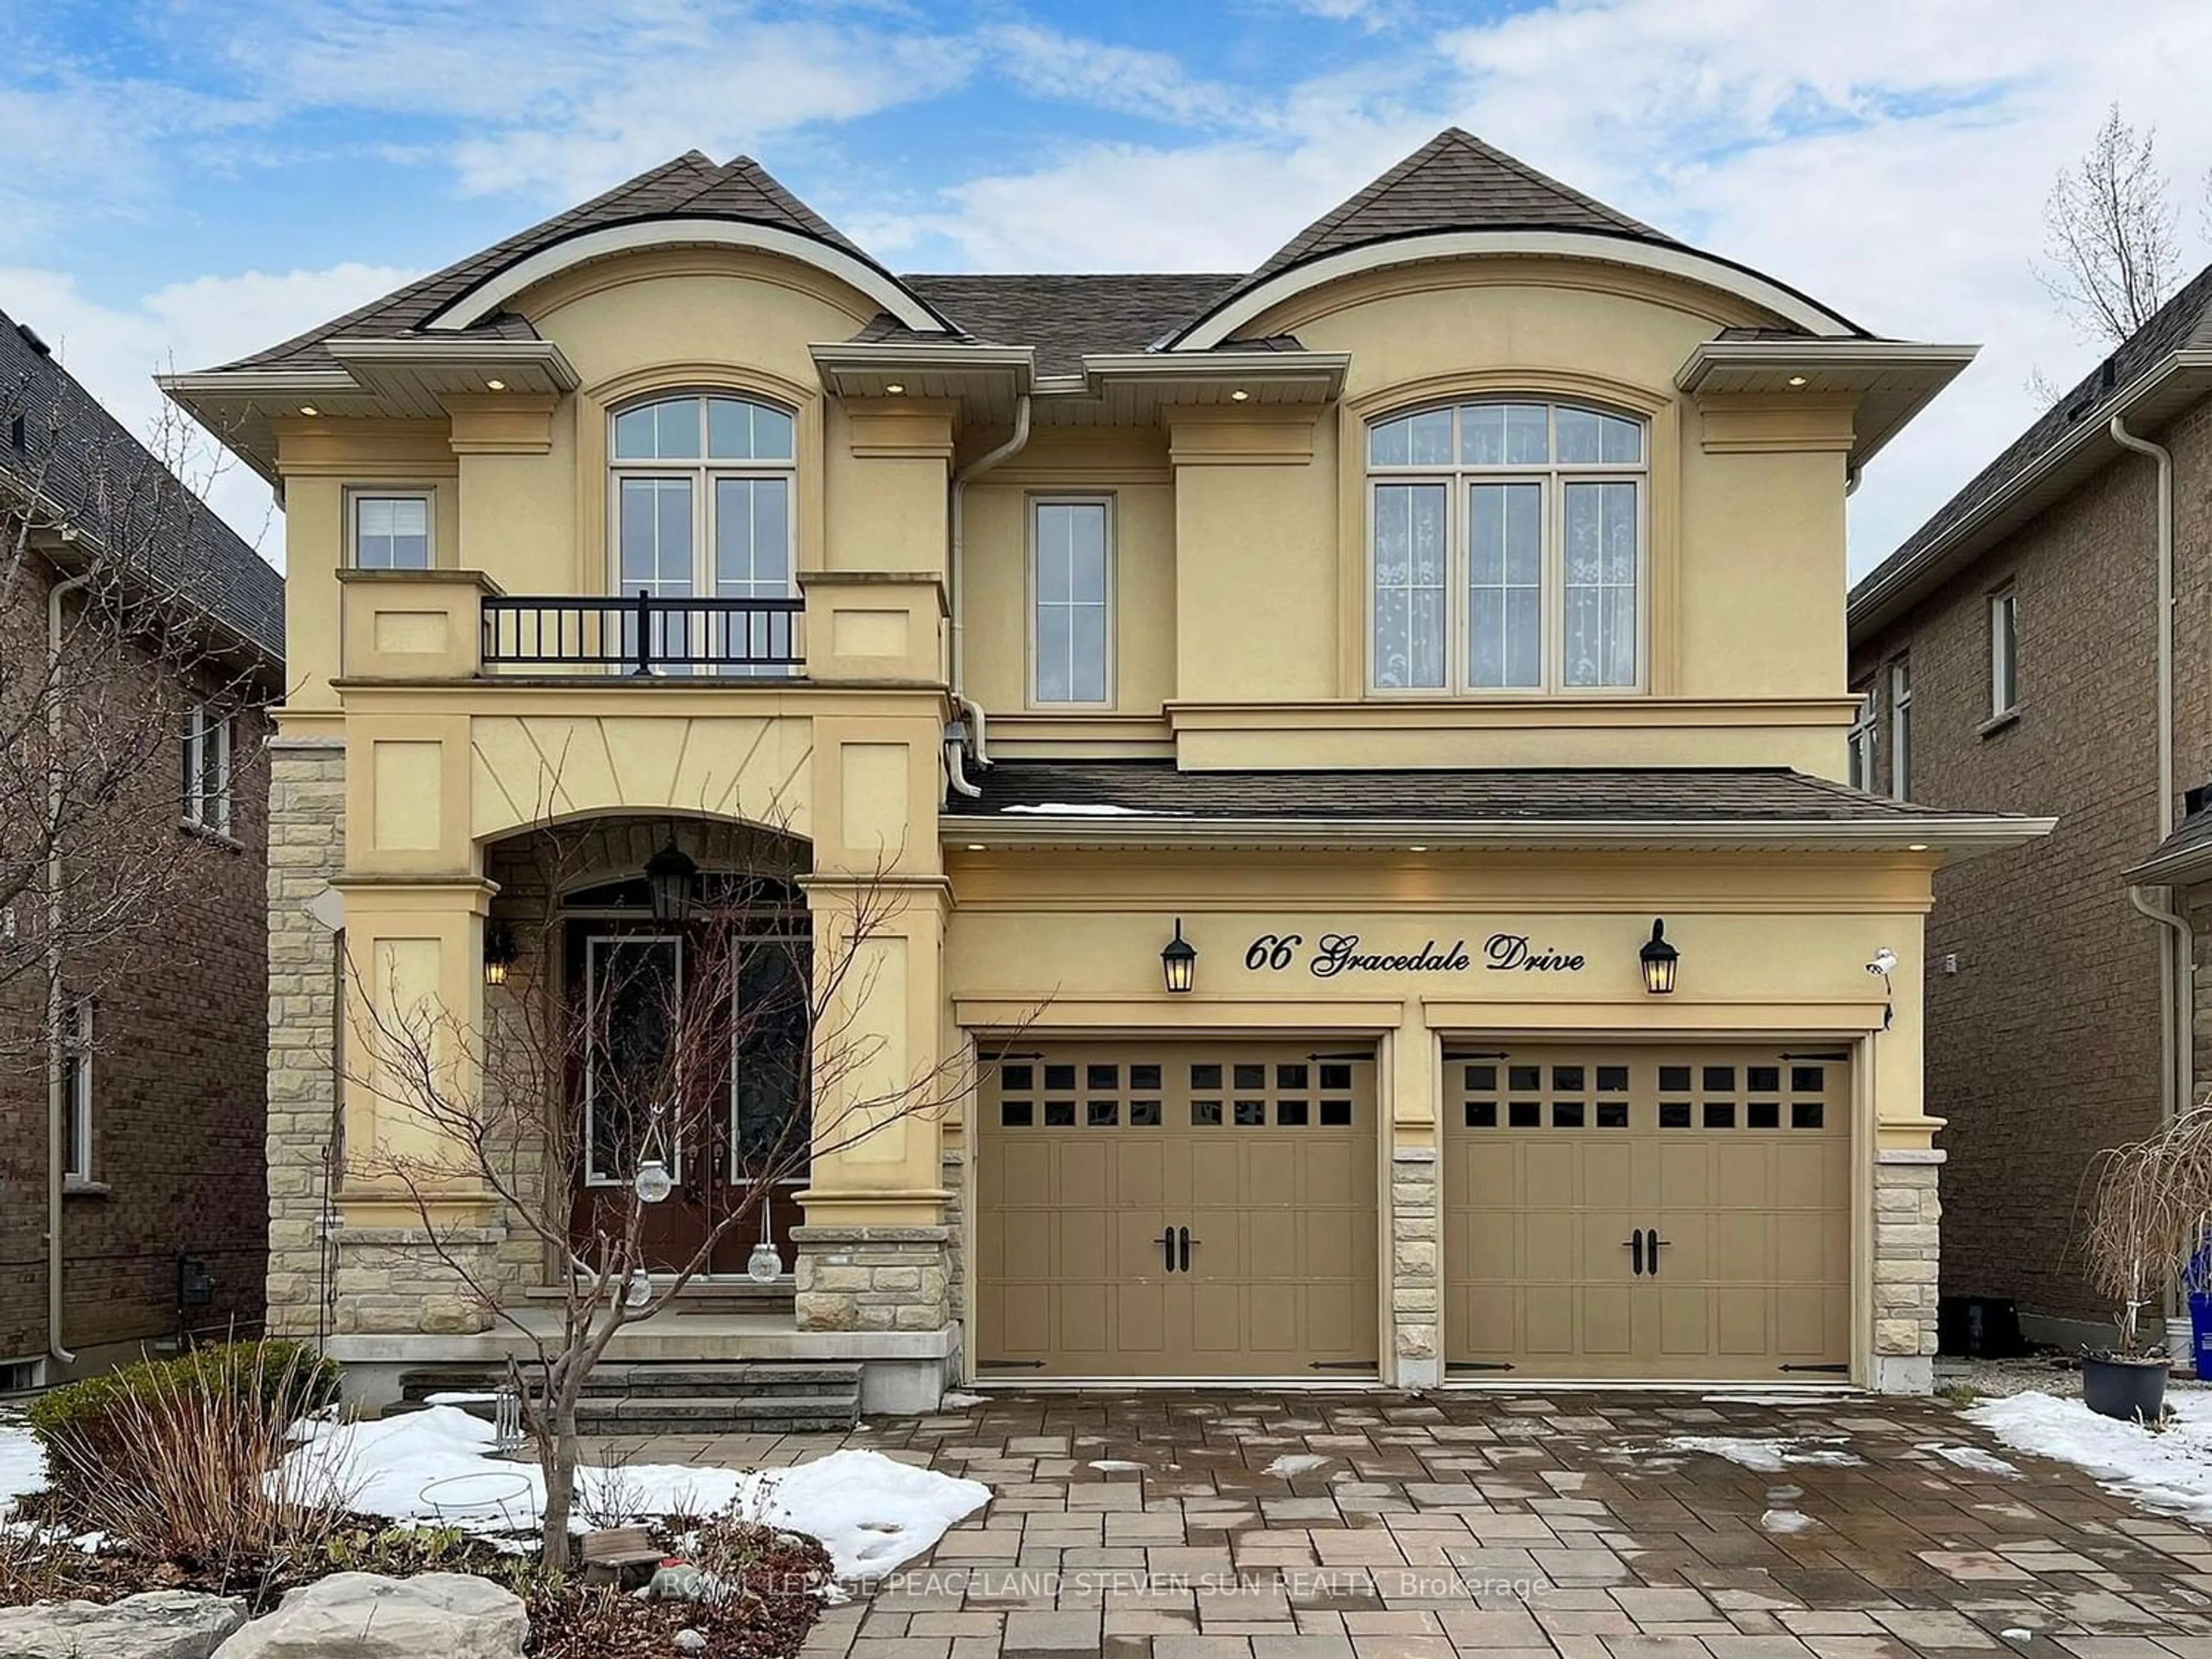 Home with stone exterior material for 66 Gracedale Dr, Richmond Hill Ontario L4C 0Y5